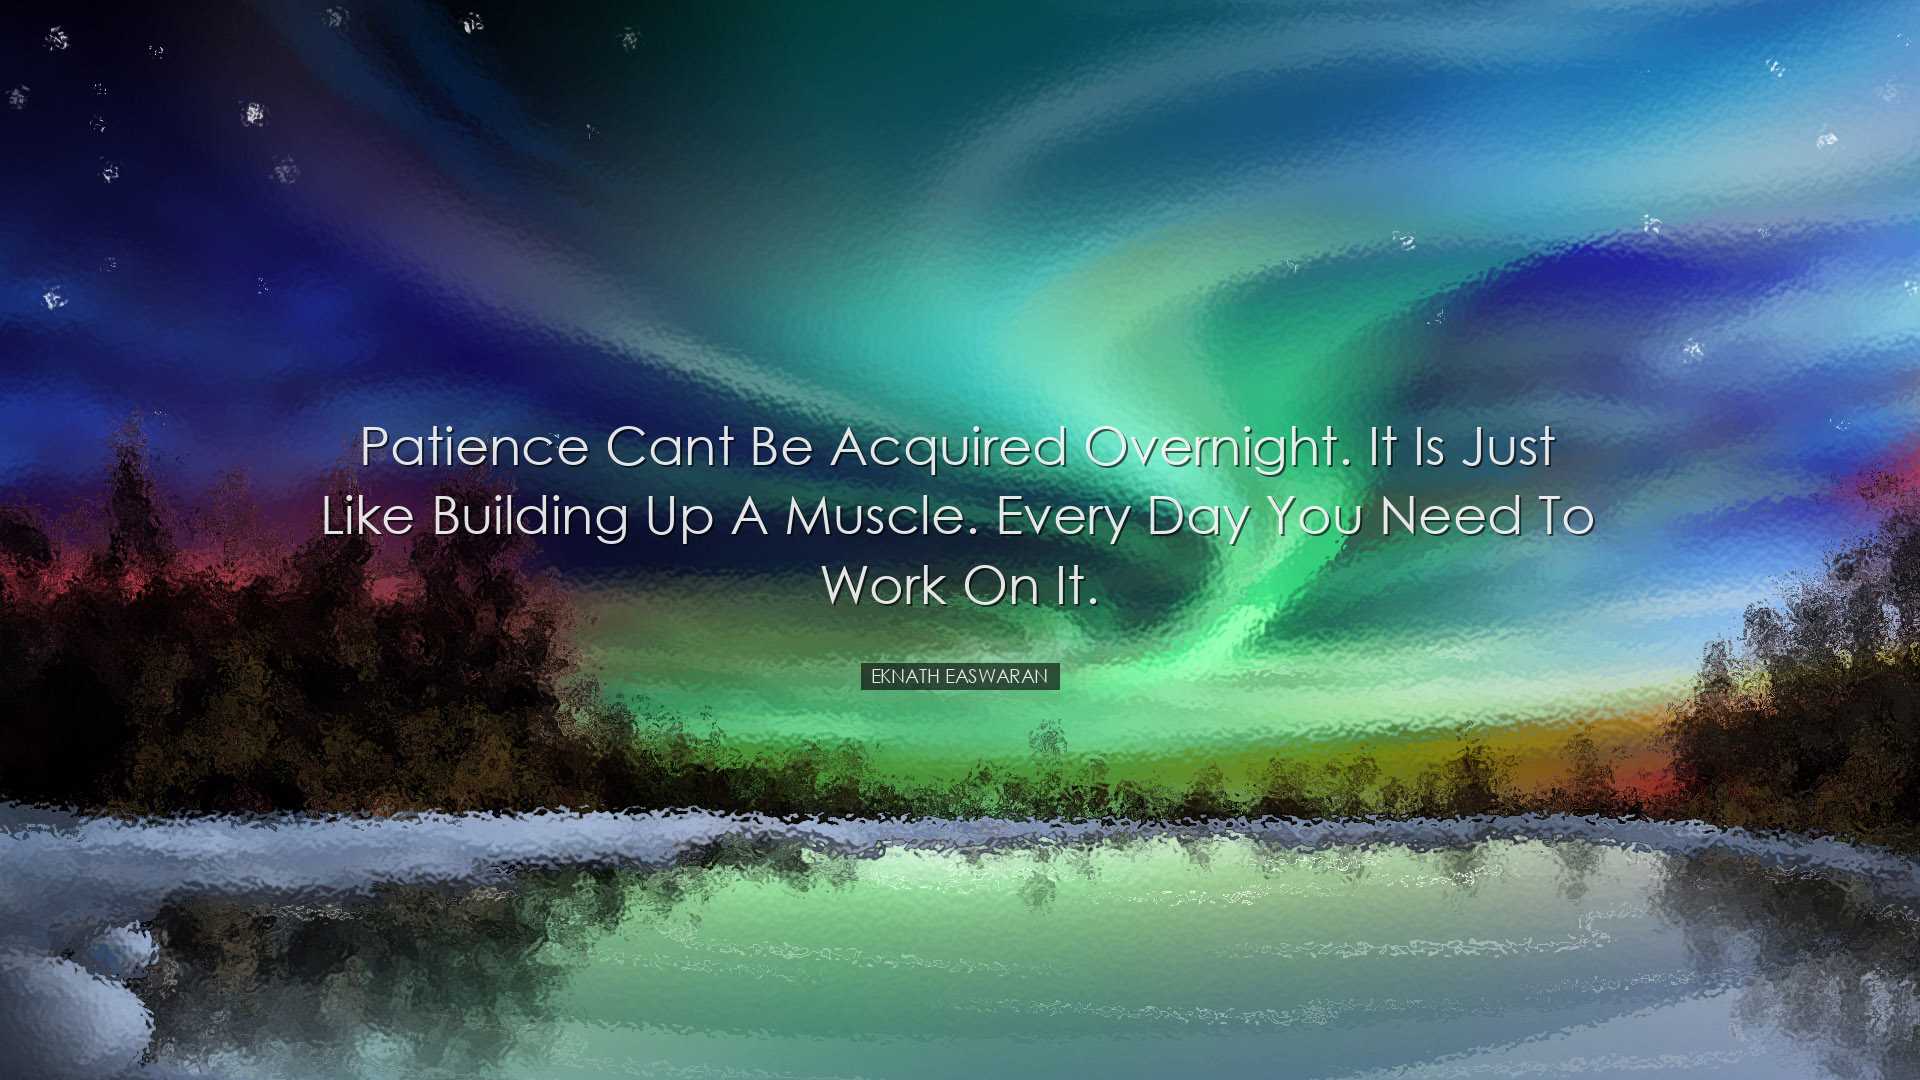 Patience cant be acquired overnight. It is just like building up a